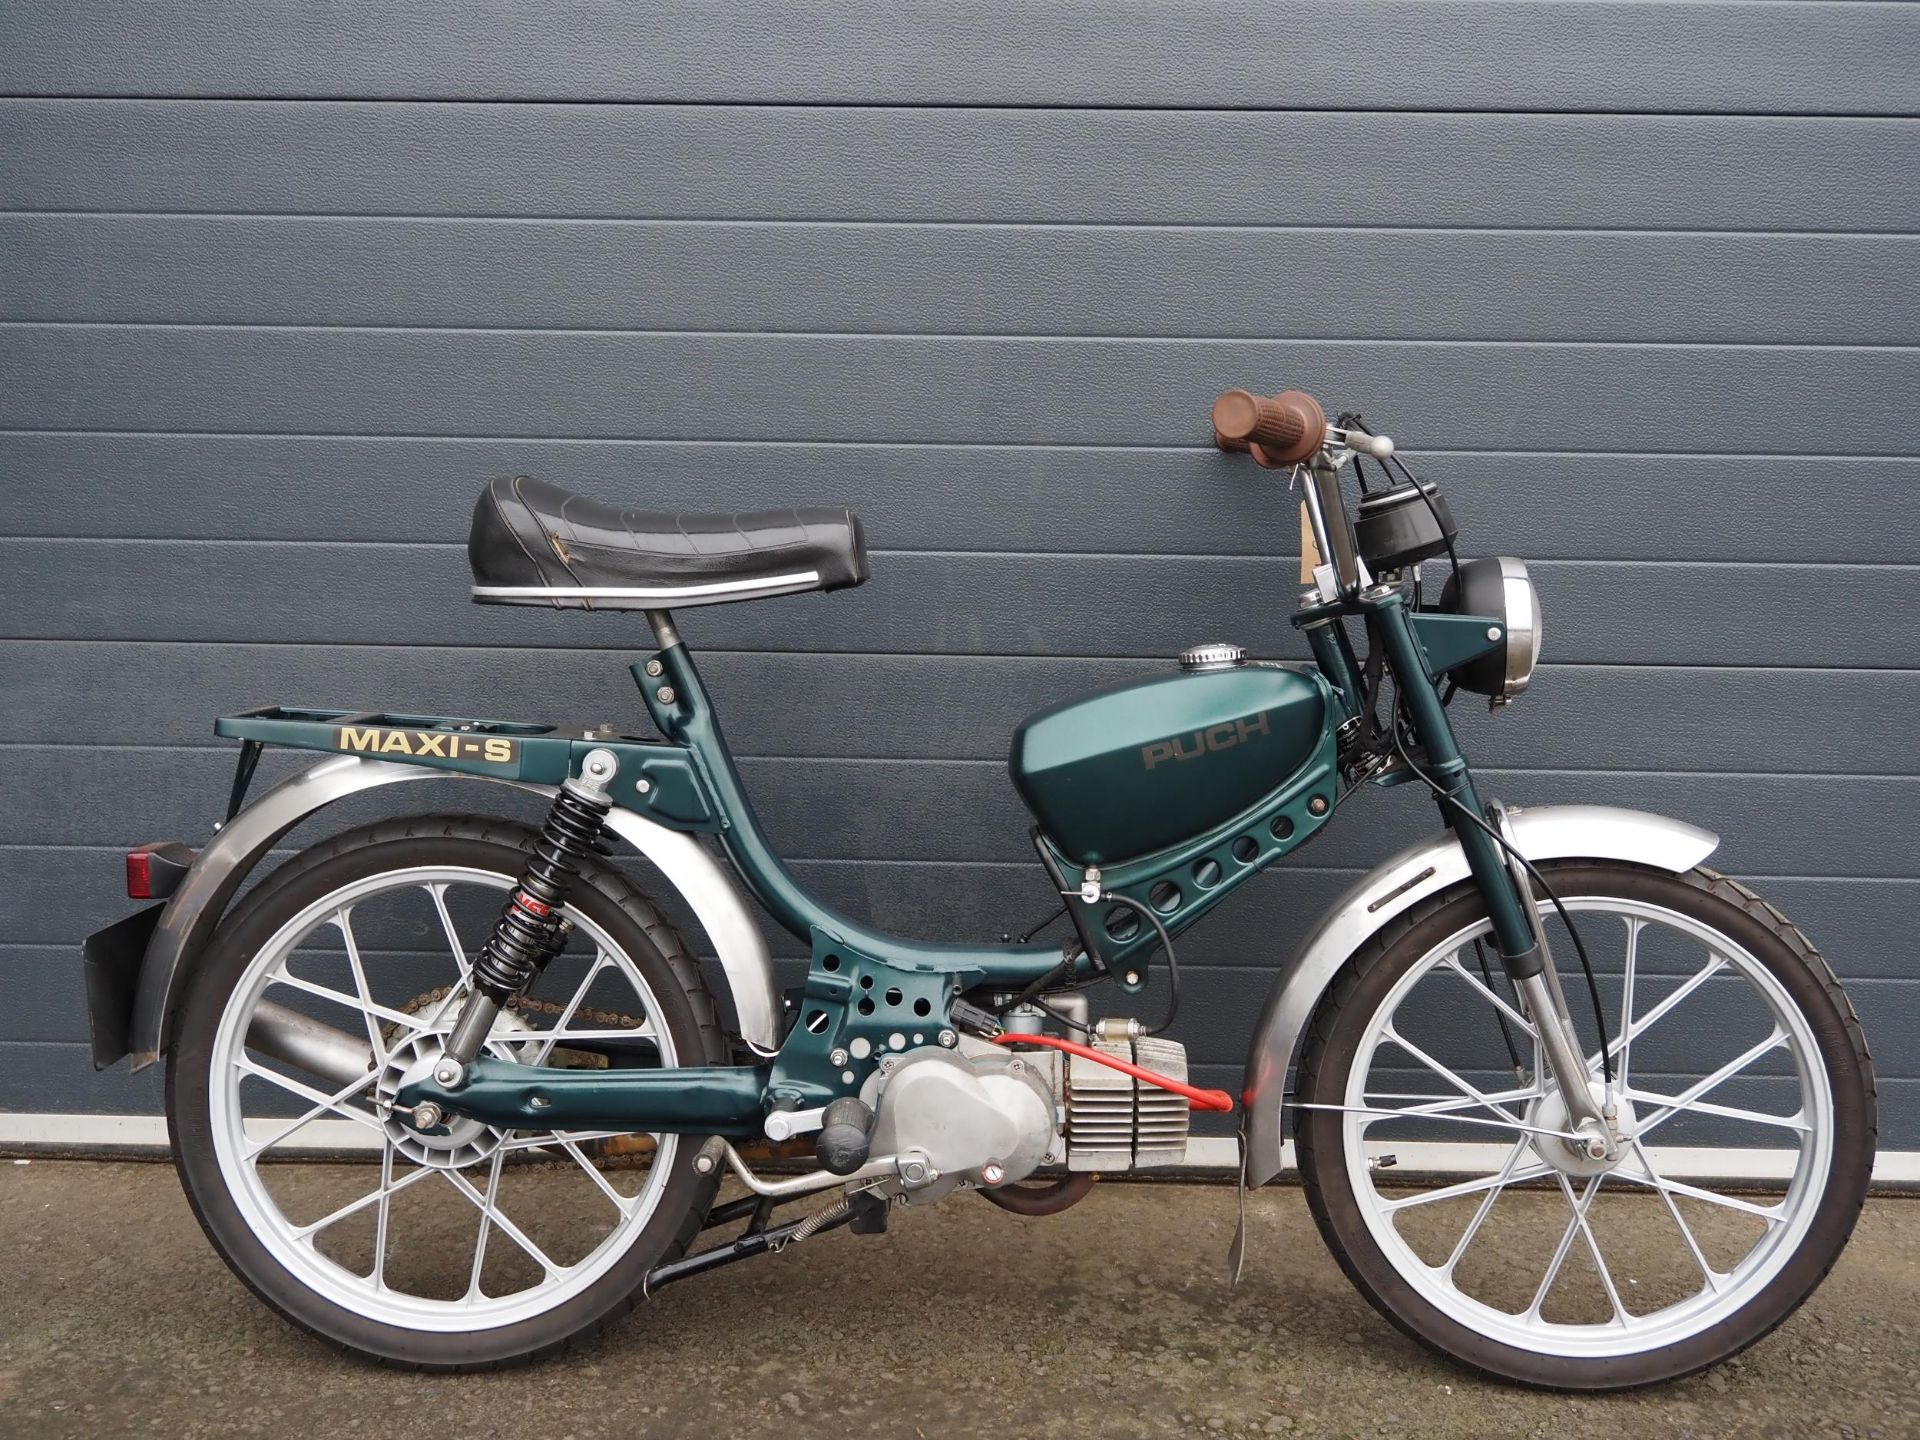 Puch Maxi-s moped. 49cc. 1979. Frame No. 3200706 Engine No. 3200706 Runs and rides. Will need